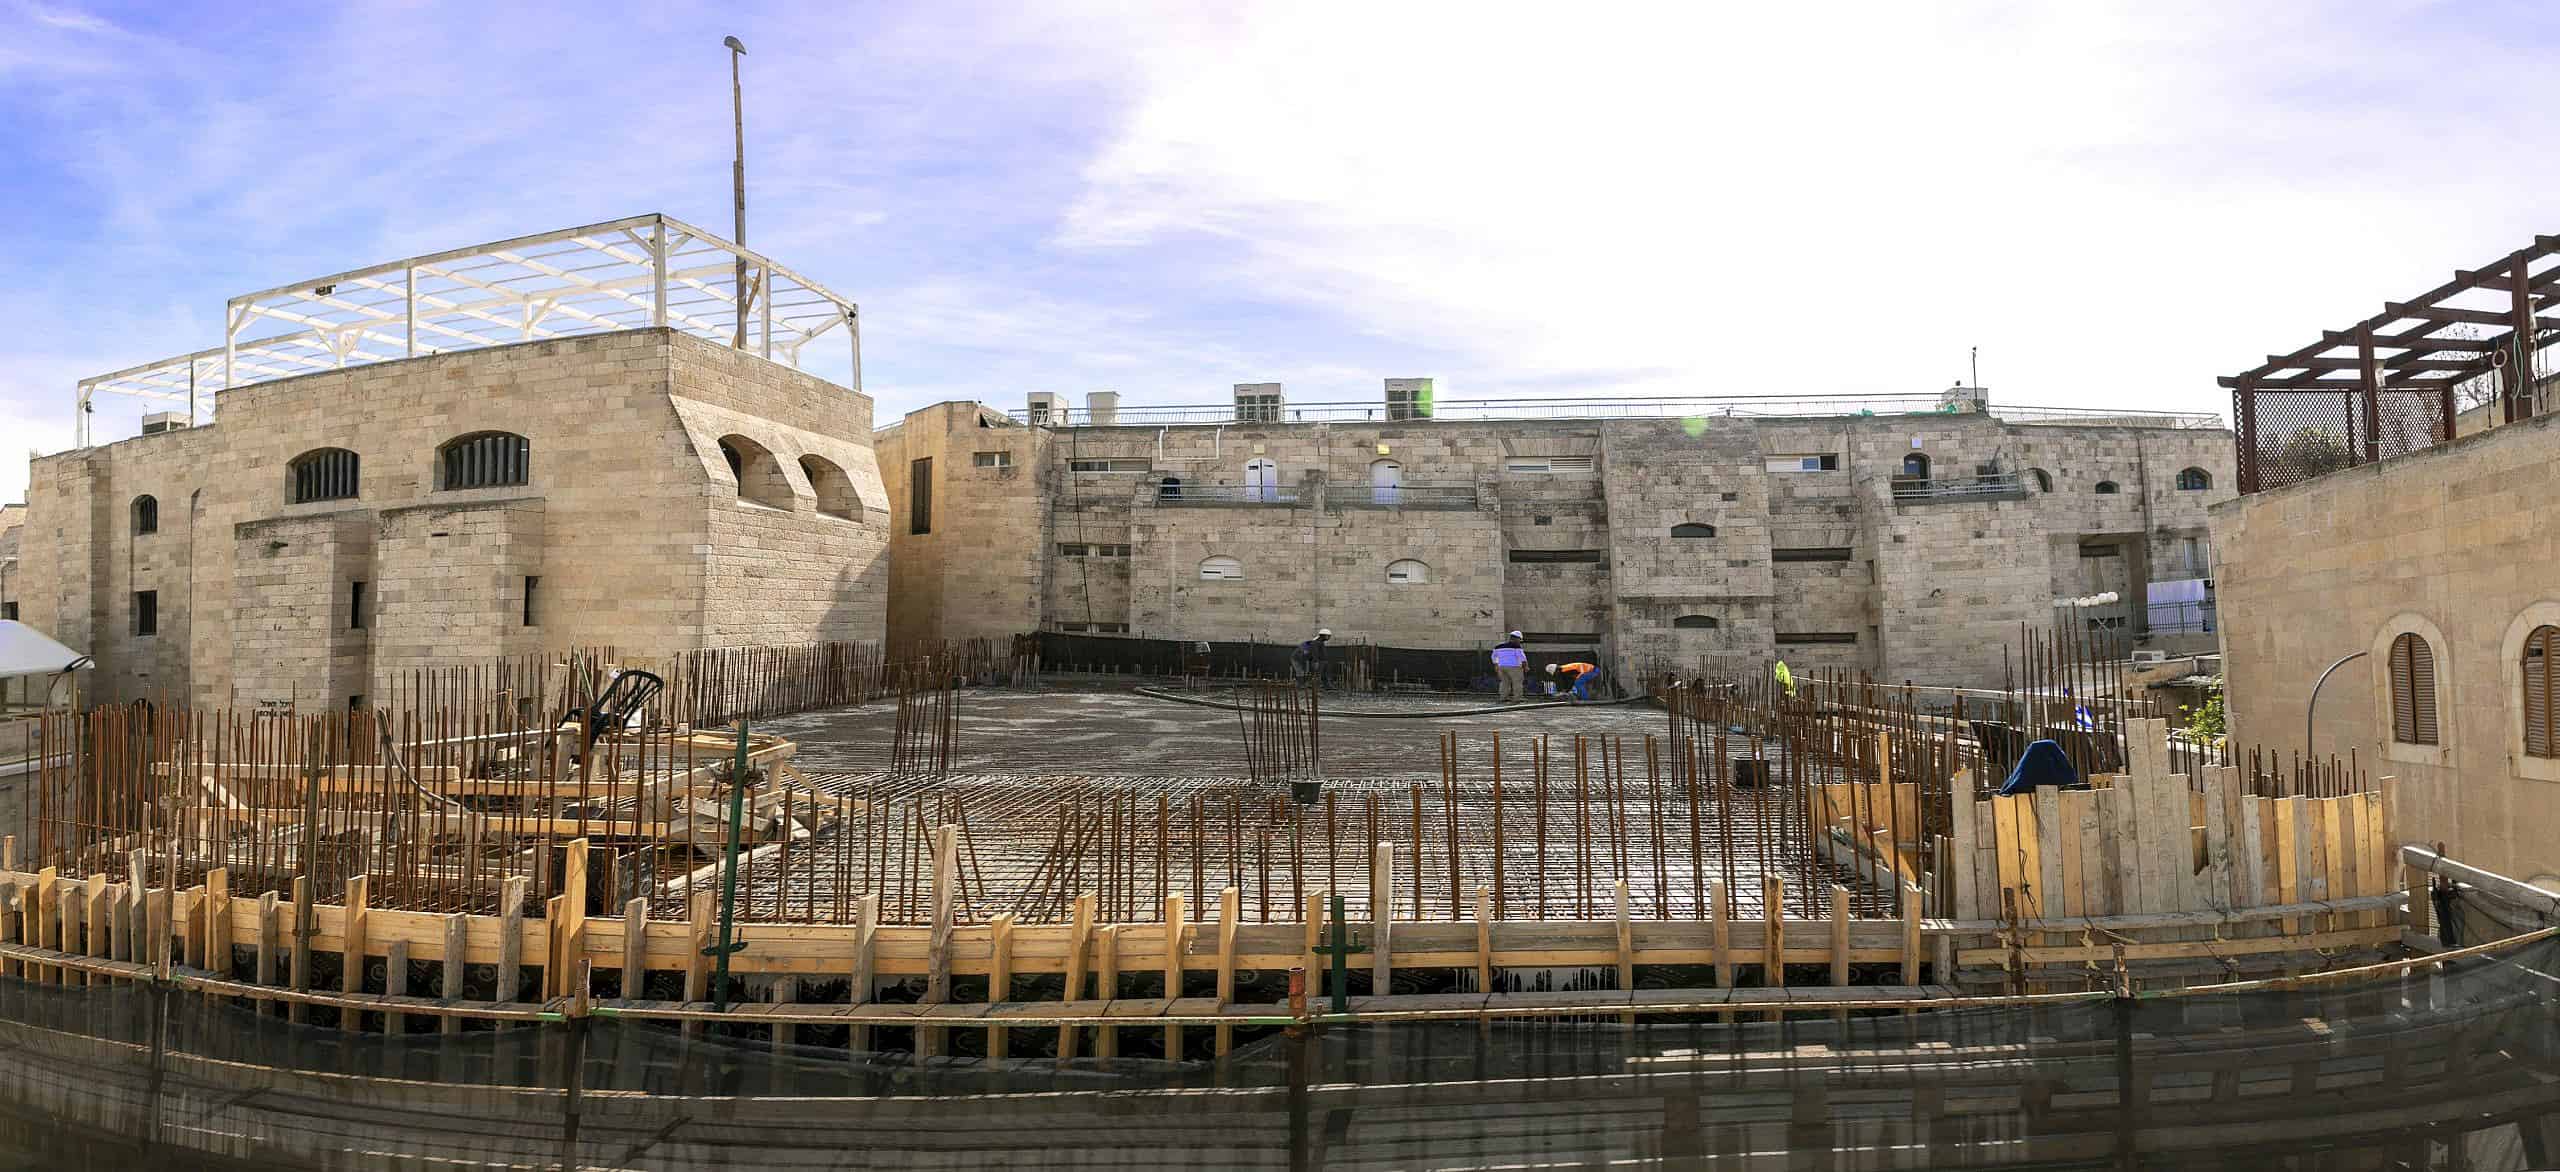 The rooftop of the Tiferet Yisrael Synagogue in the Old City of Jerusalem. Credit: Courtesy.